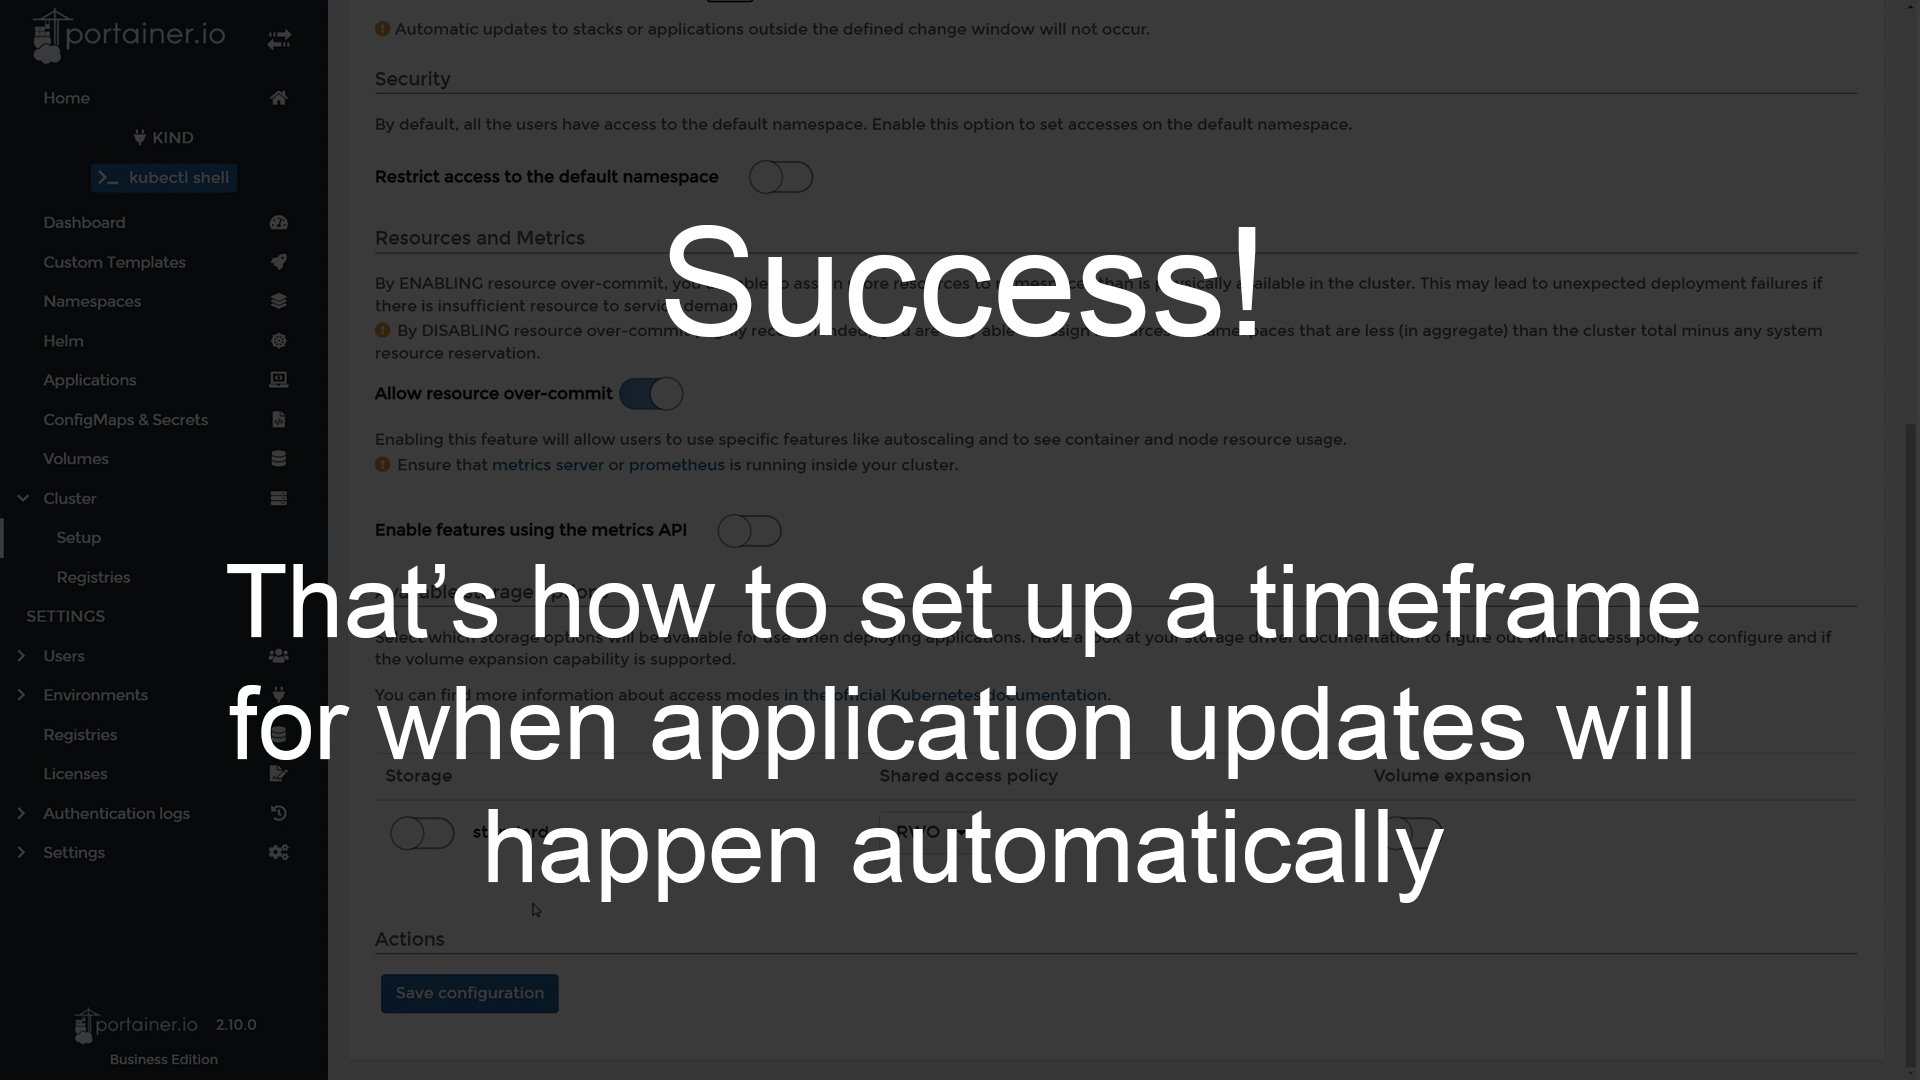 You have now set up a time frame for automatic application updates